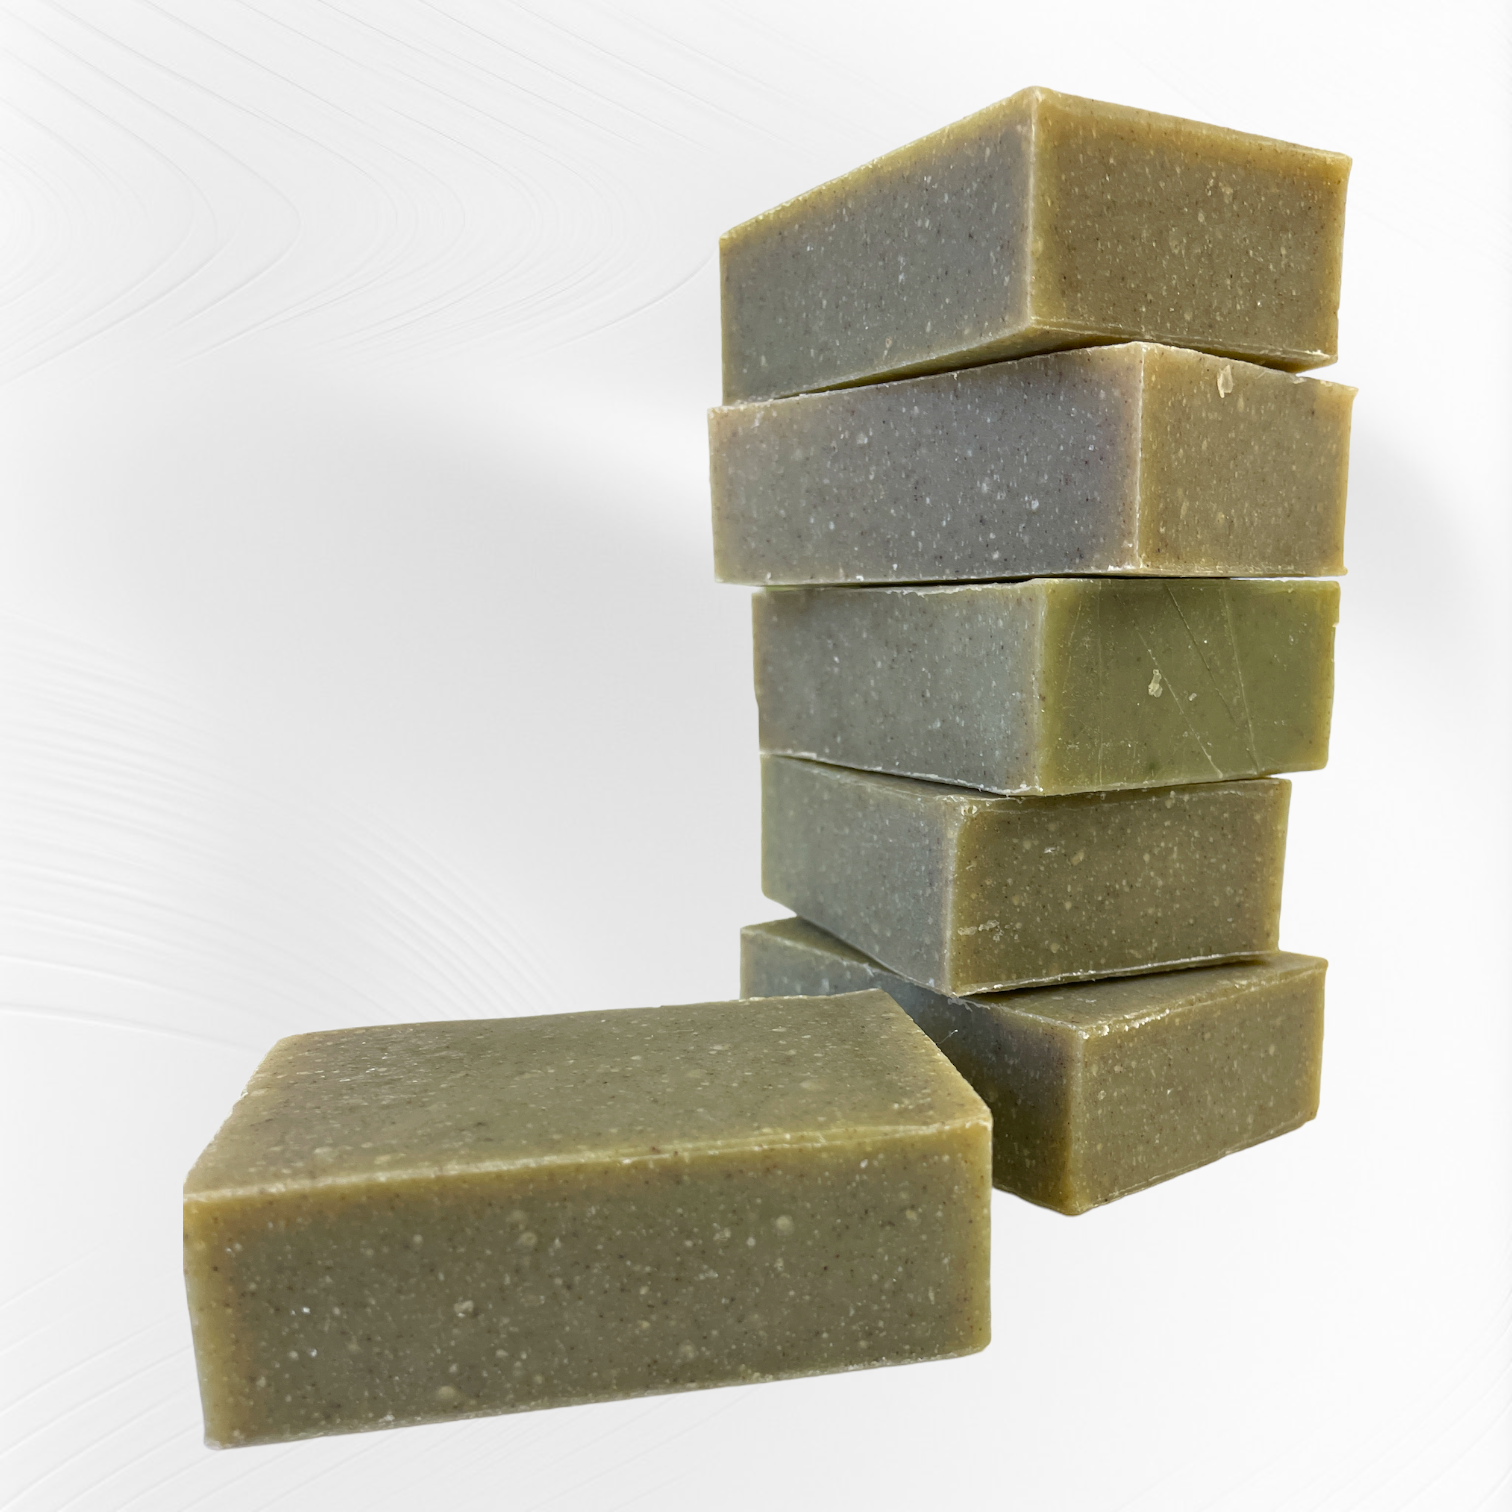 Eucalyptus Mint Exfoliating Body Soap Bar will quickly become your favorite. It will not only leave you invigorated but also stimulate your skin as it gently scrubs away dead skin and dirt.  Formulated with menthol this bar will make your shower time feel like a therapeutic spa treatment!  This is one of our Vegan products formulated for any skin type, even the most sensitive skin.